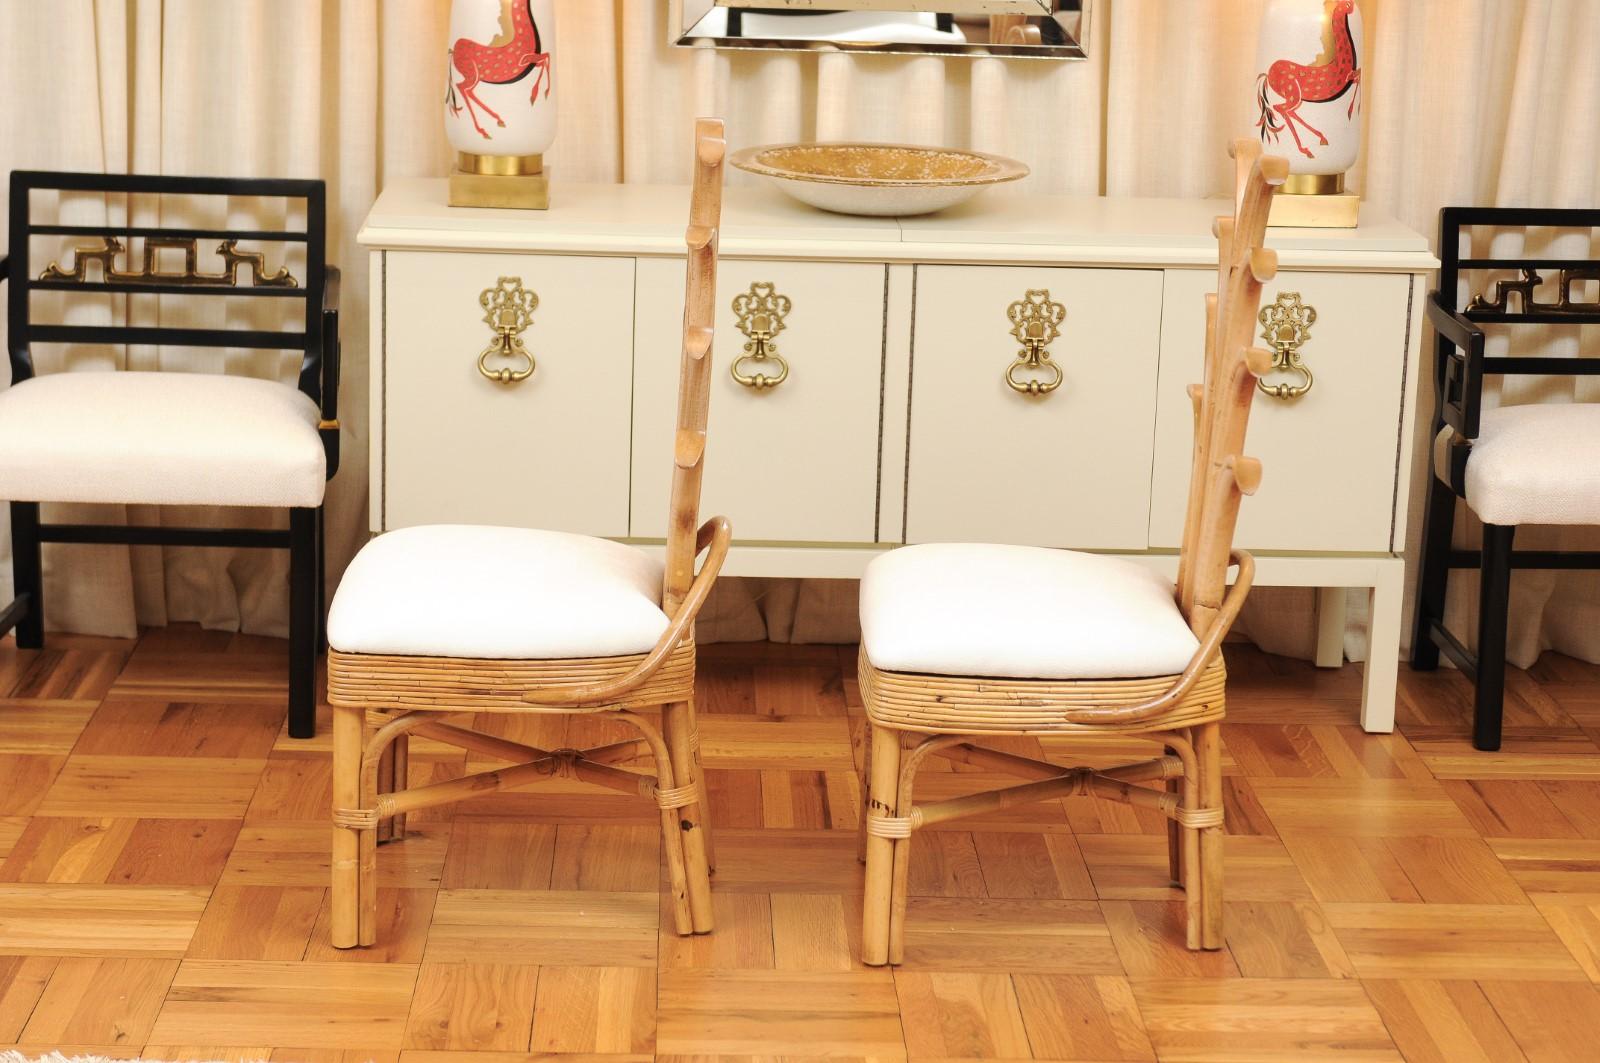 Exquisite Set of 10 Rattan and Cane Palm Frond Dining Chairs, circa 1950 For Sale 6